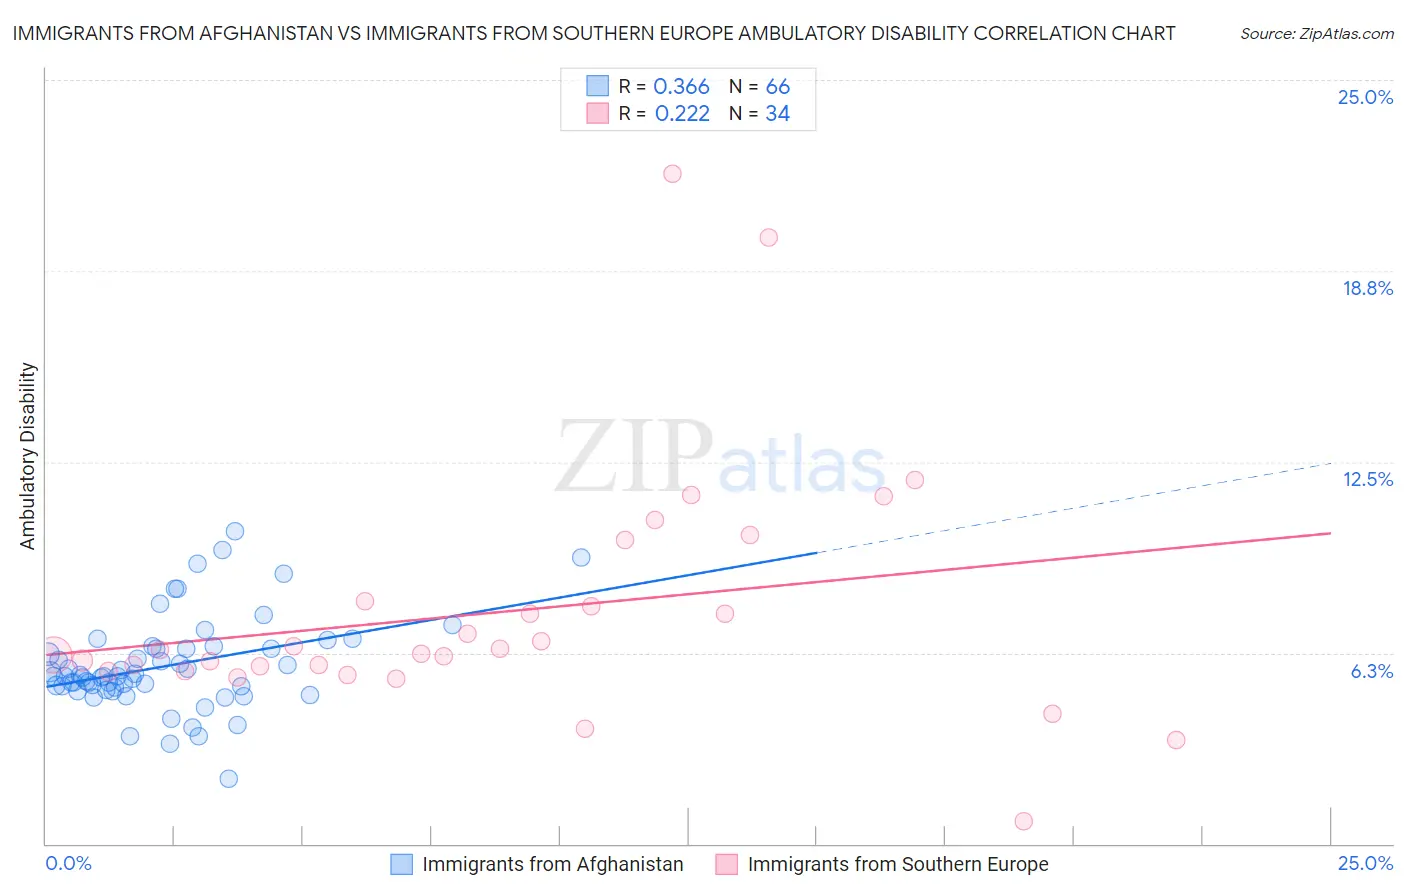 Immigrants from Afghanistan vs Immigrants from Southern Europe Ambulatory Disability